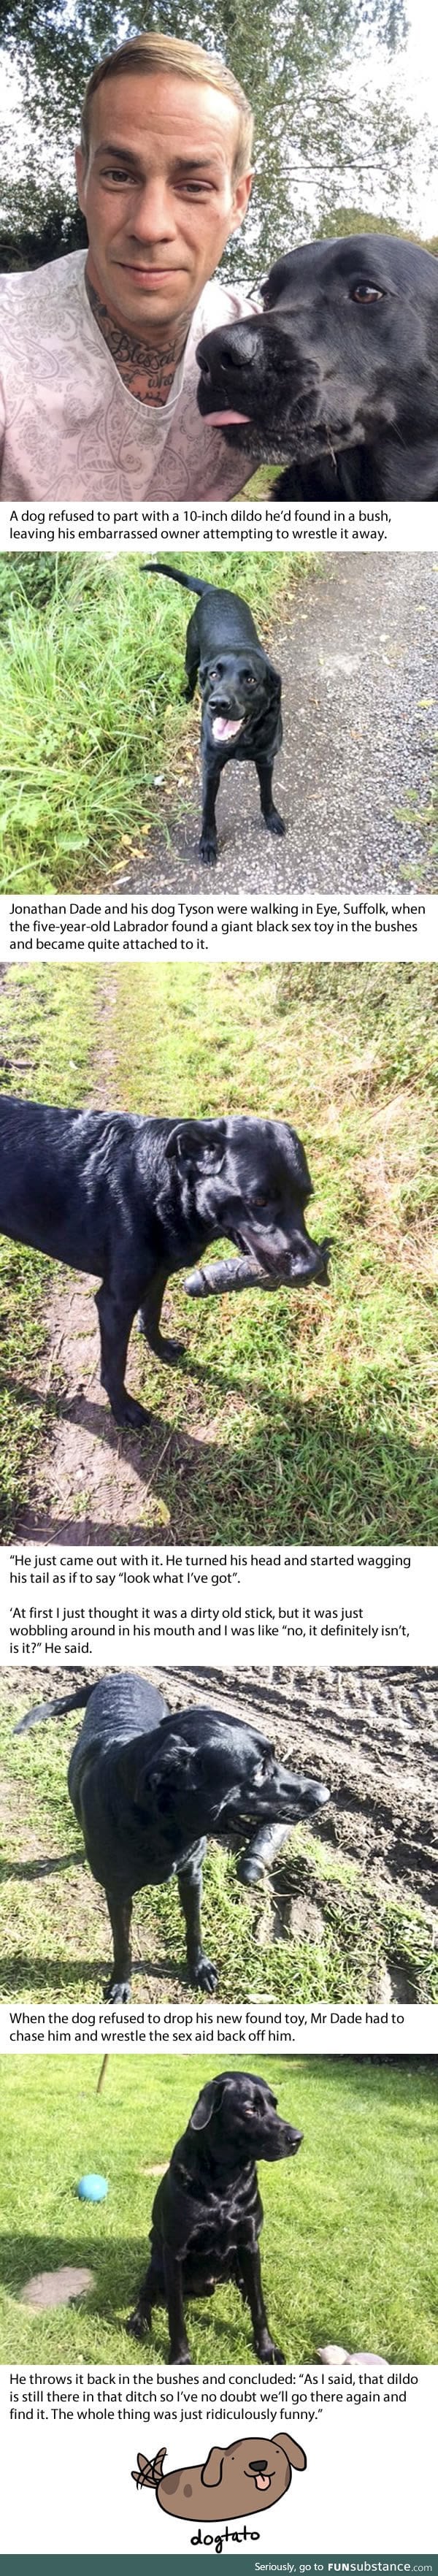 Dog finds massive 10-inch d*ldo in park and refuses to let it go